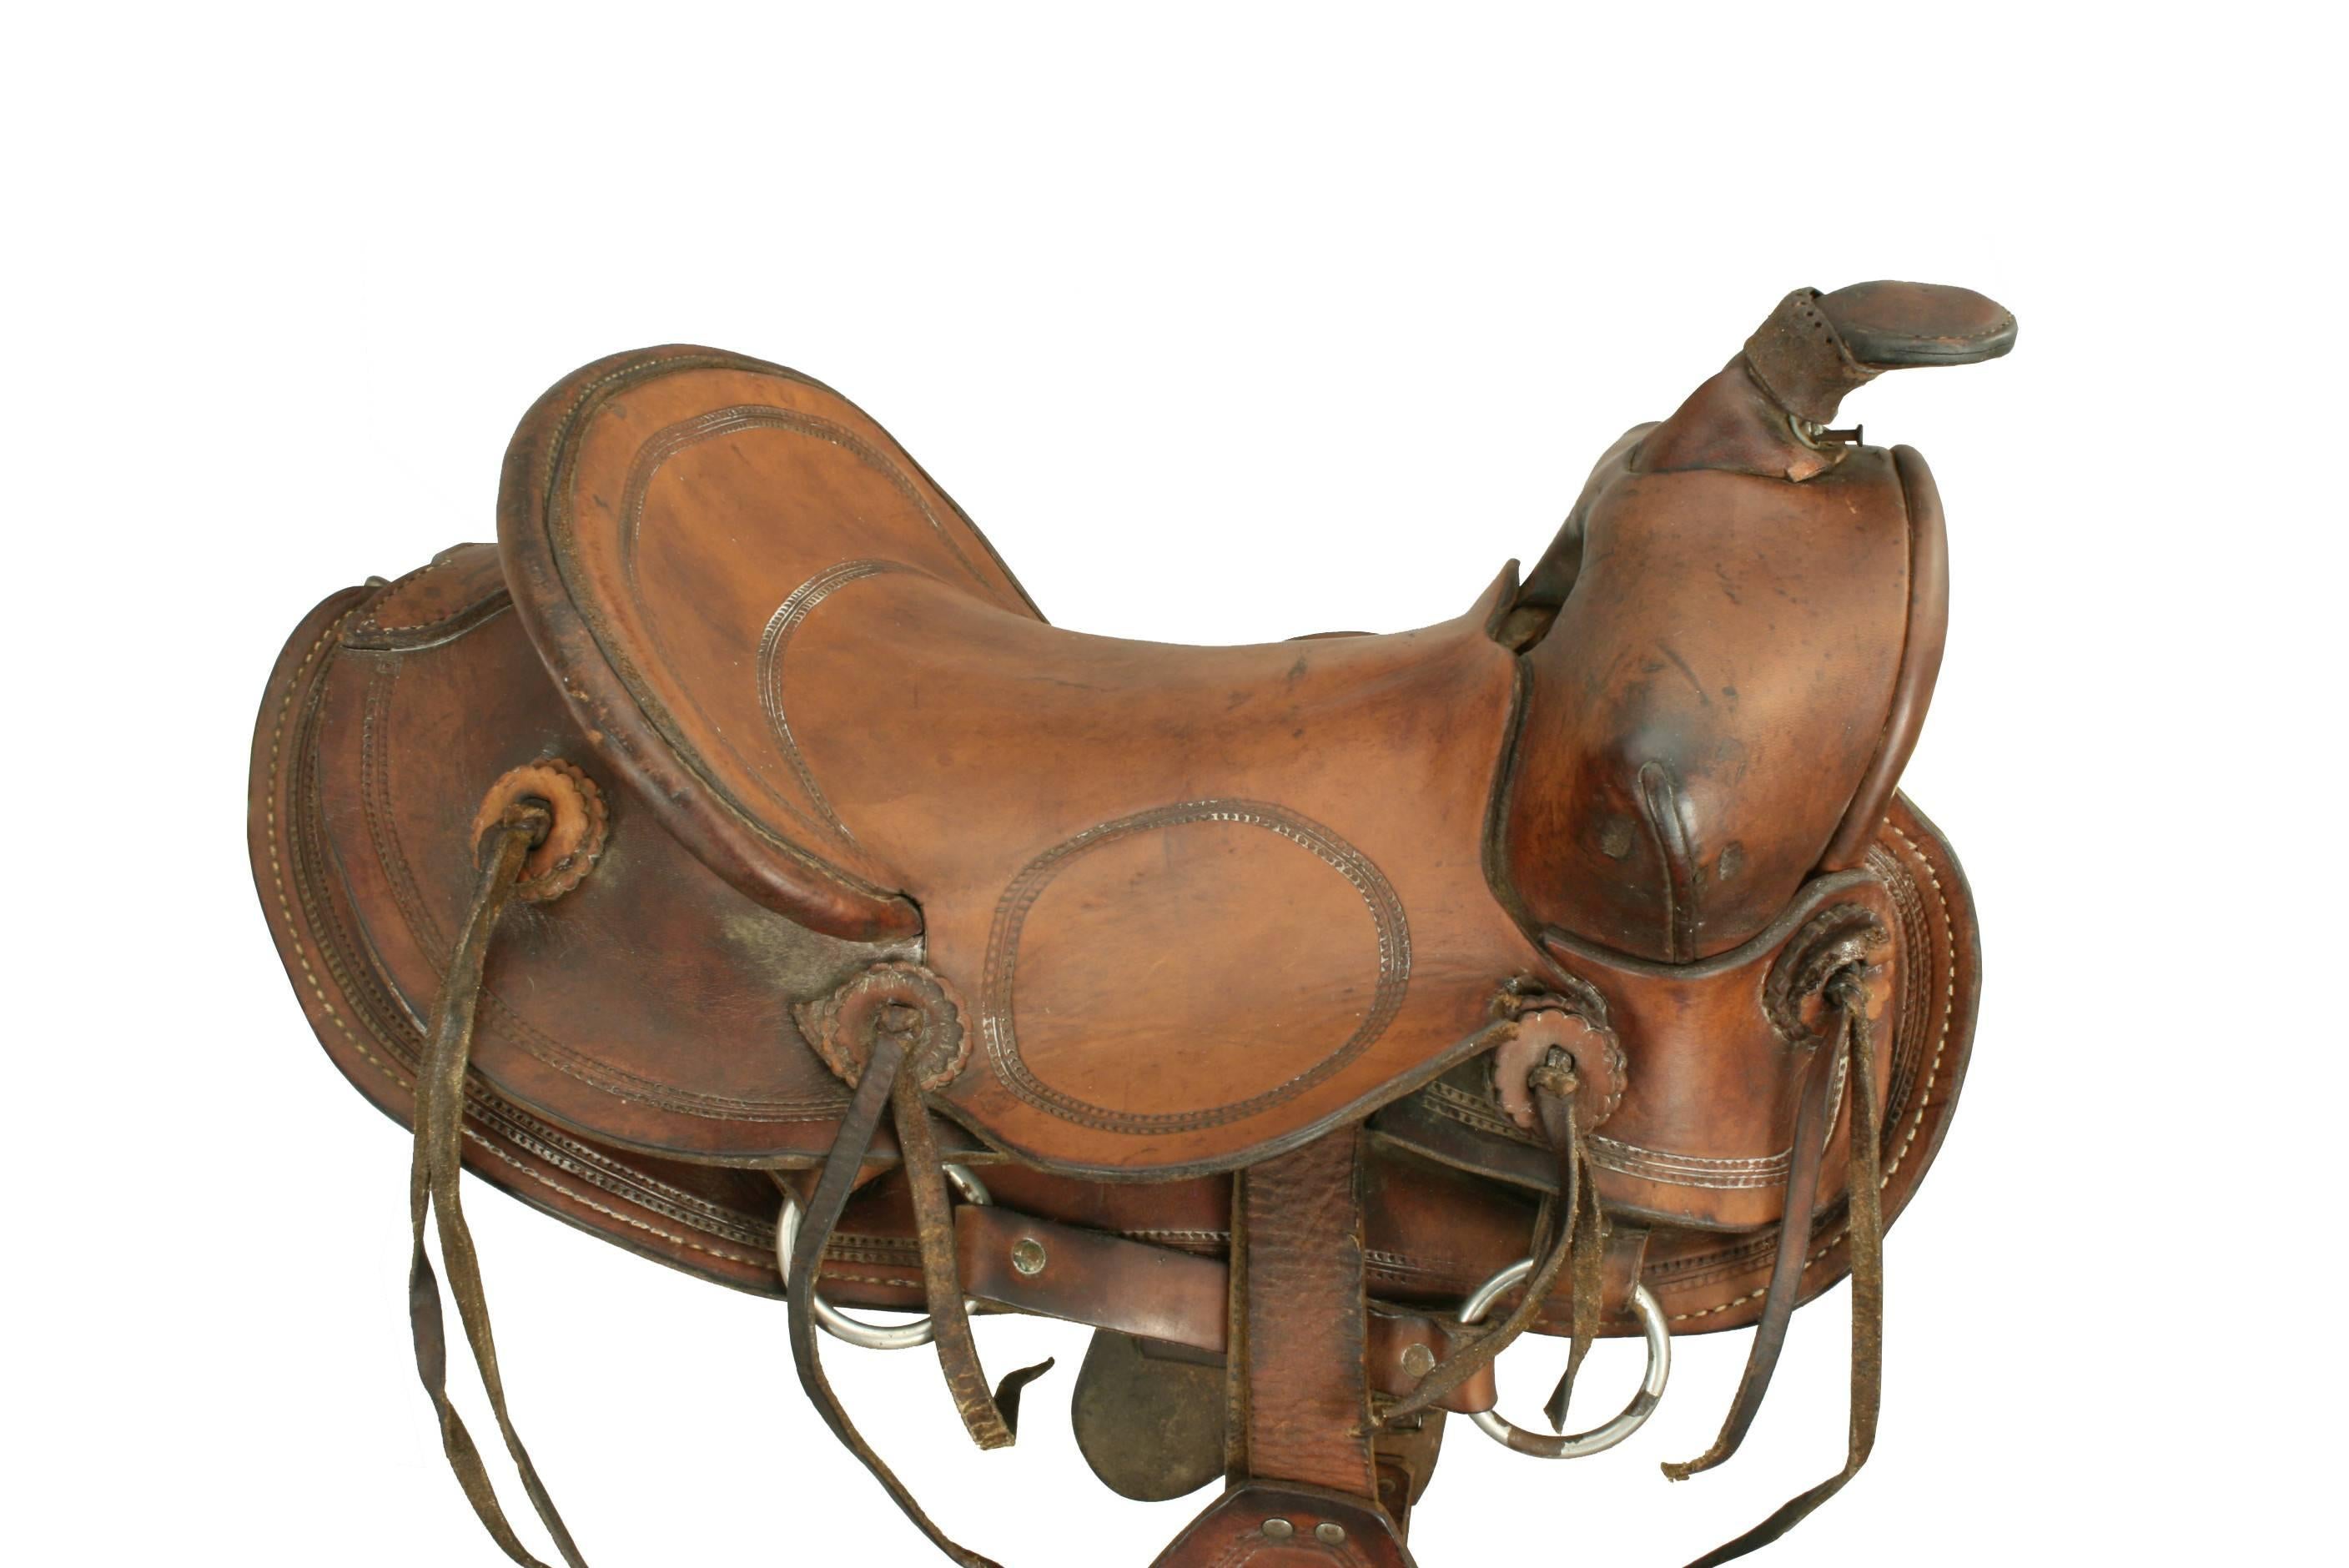 Vintage Child's Western Saddle.
A child's western saddle made from leather. The saddle comes with hooded safety stirrups and is decorated with some tooling on the seat, jockey and fender. The horn is a little lose from the pommel, the leather is a